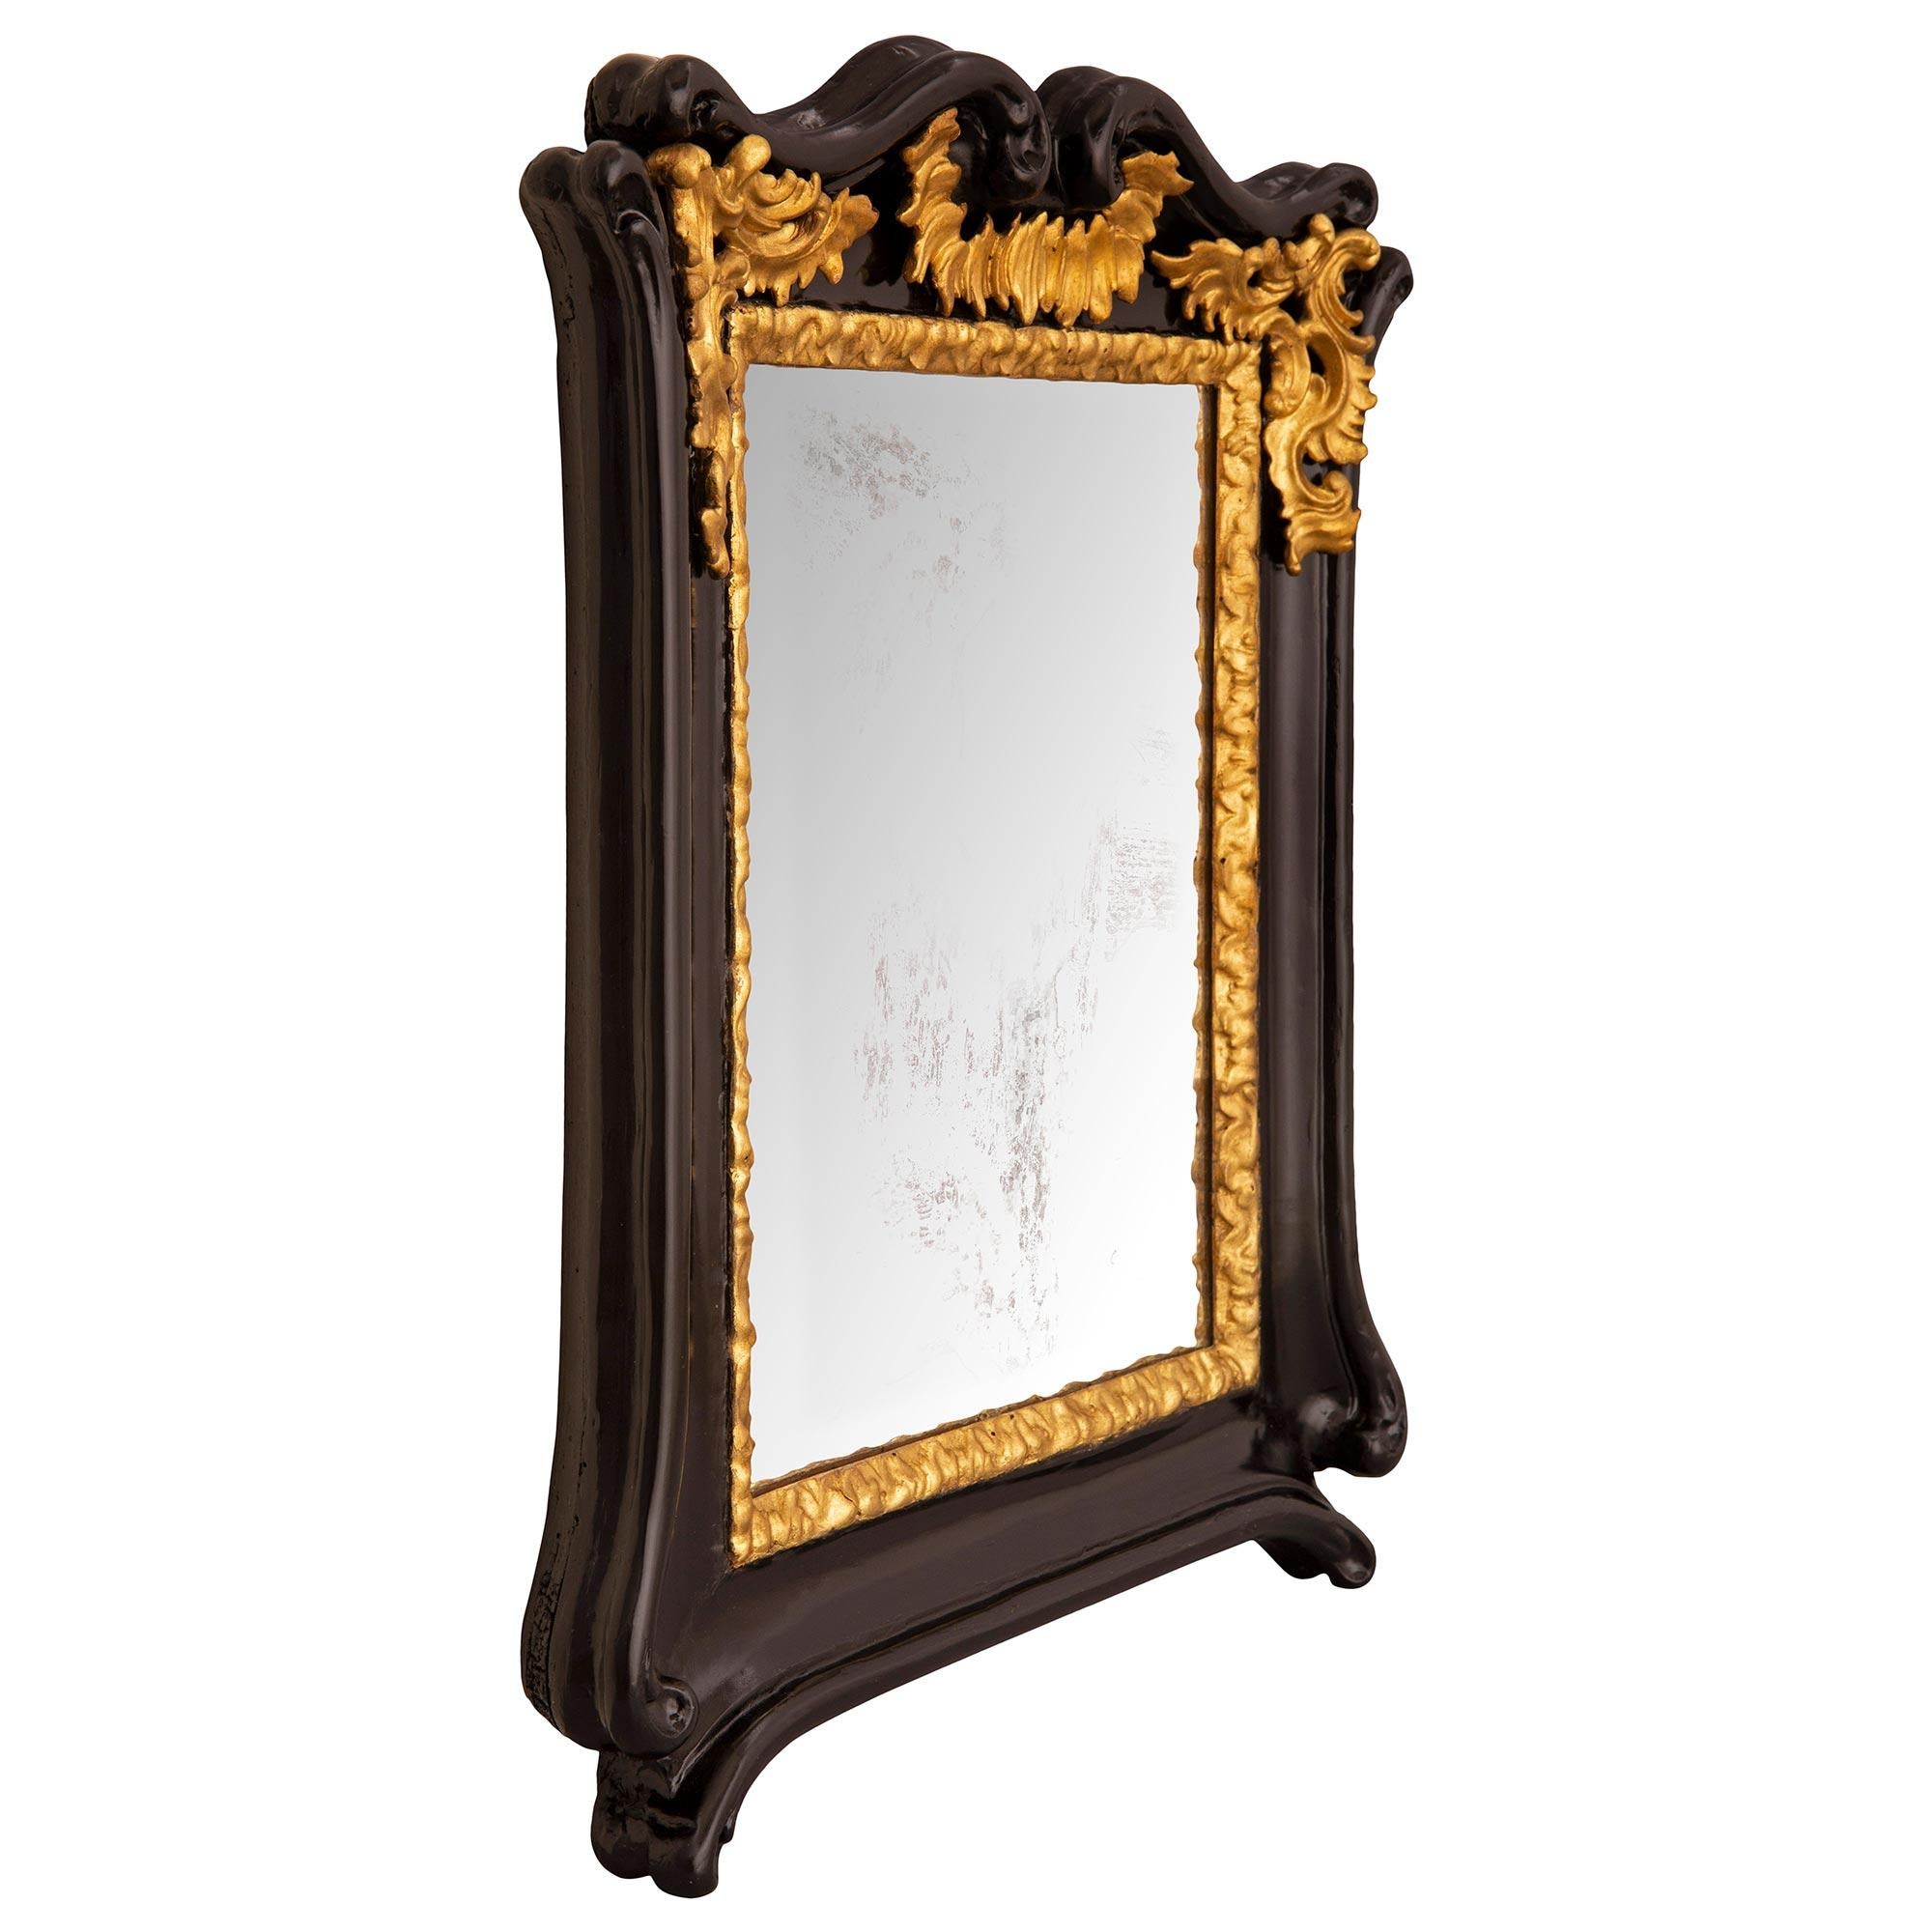 A fabulous and most decorative Italian 18th century Baroque st. ebonized Fruitwood and giltwood mirror. The mirror retains its original mirror plate set within an elegant finely carved giltwood border. The ebonized Fruitwood frame displays an